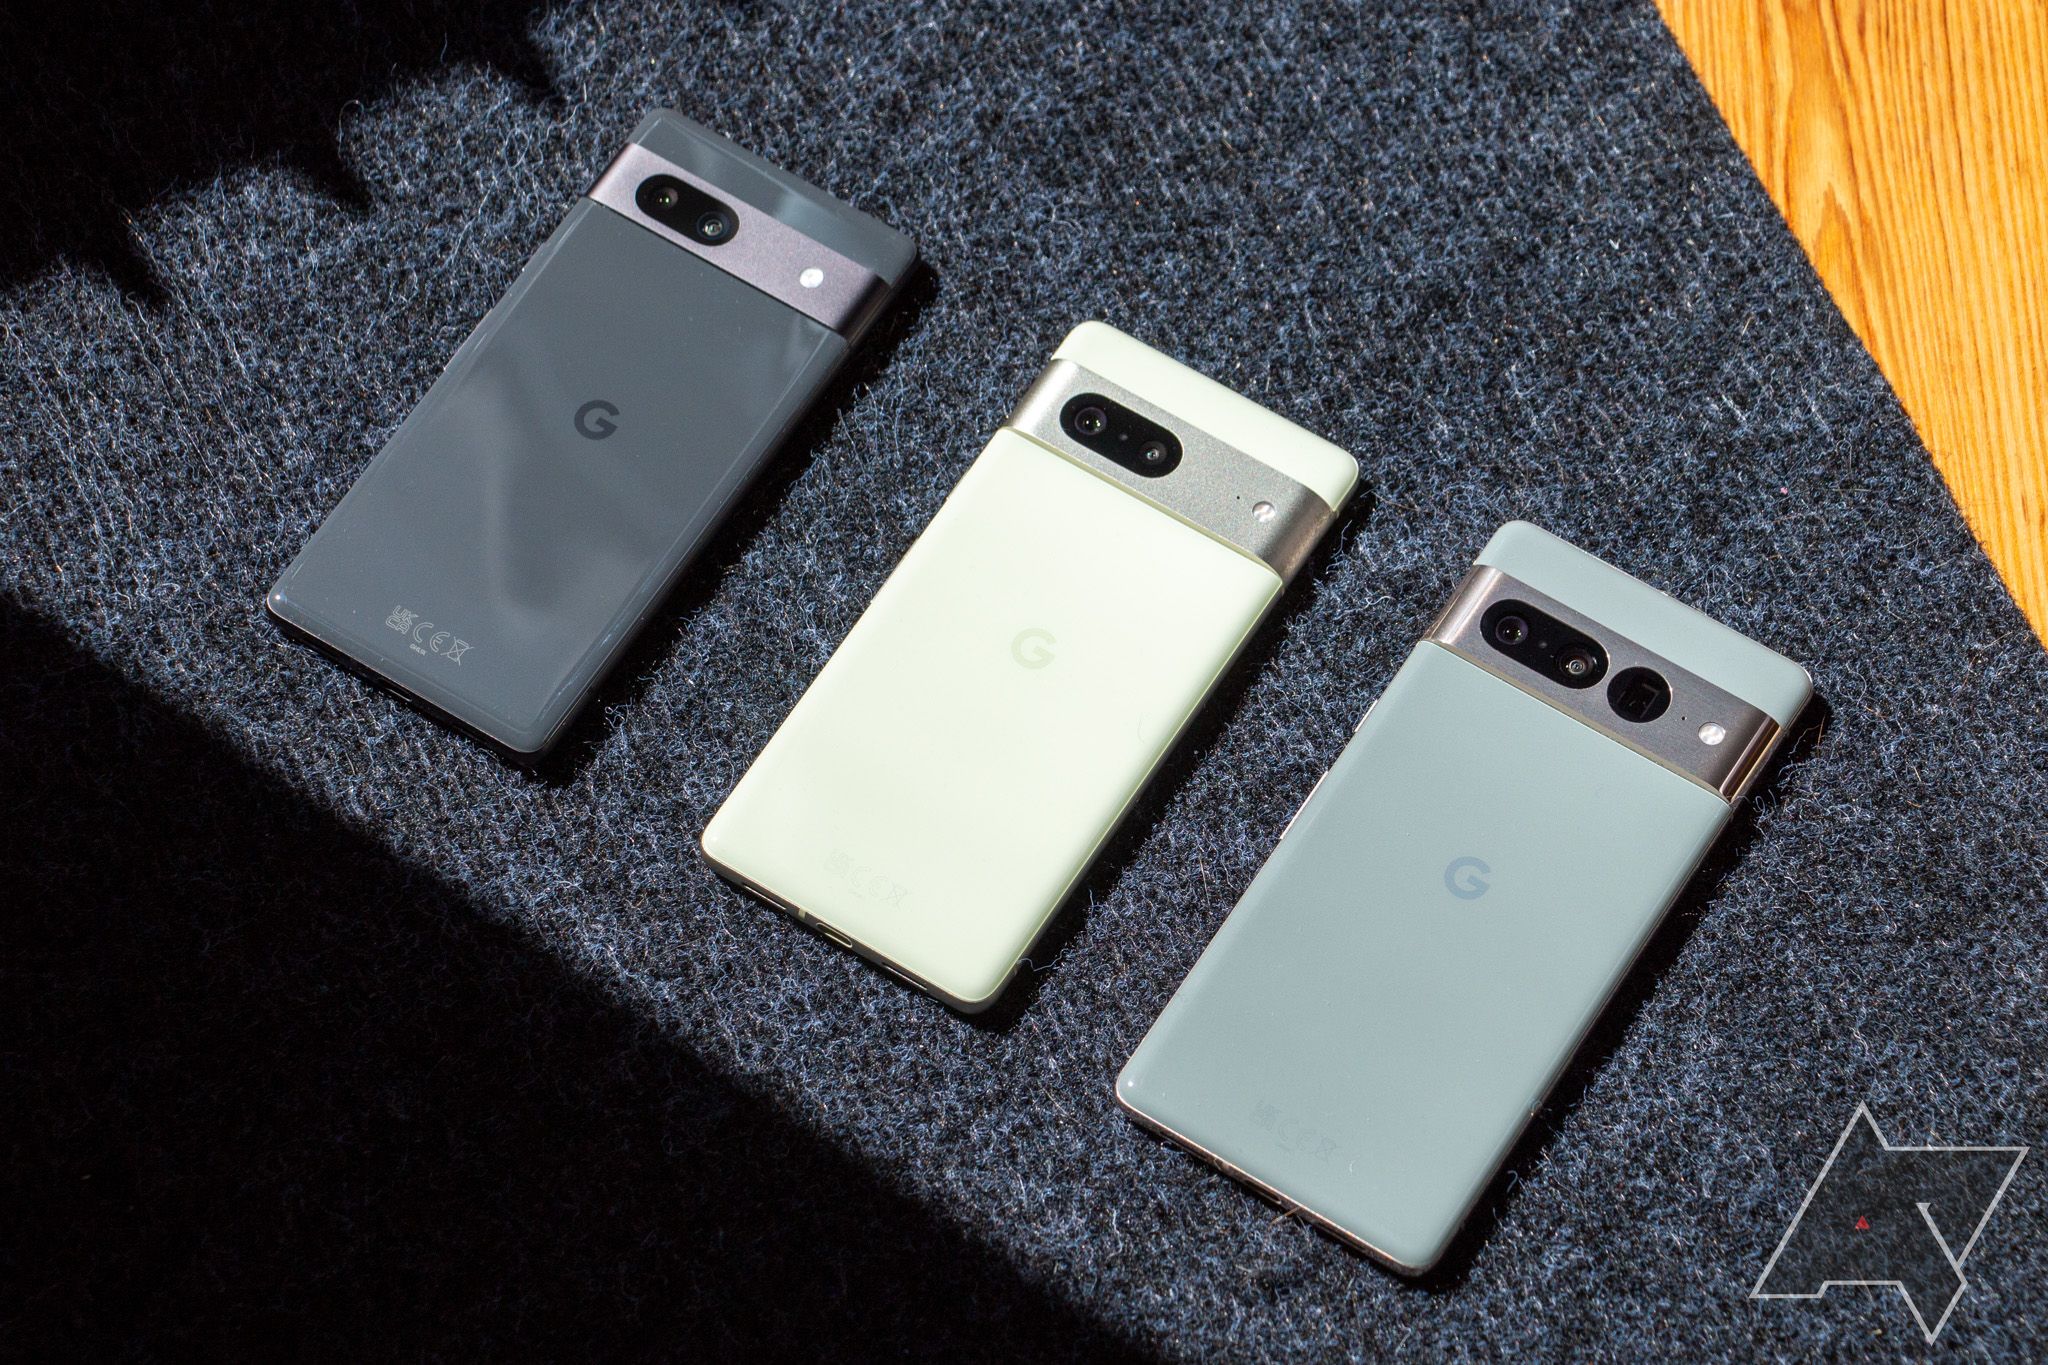 Google Pixel 7a, Pixel 7, and Pixel 7 Pro lying face-down next to each other on dark gray textured surface in sunlight.